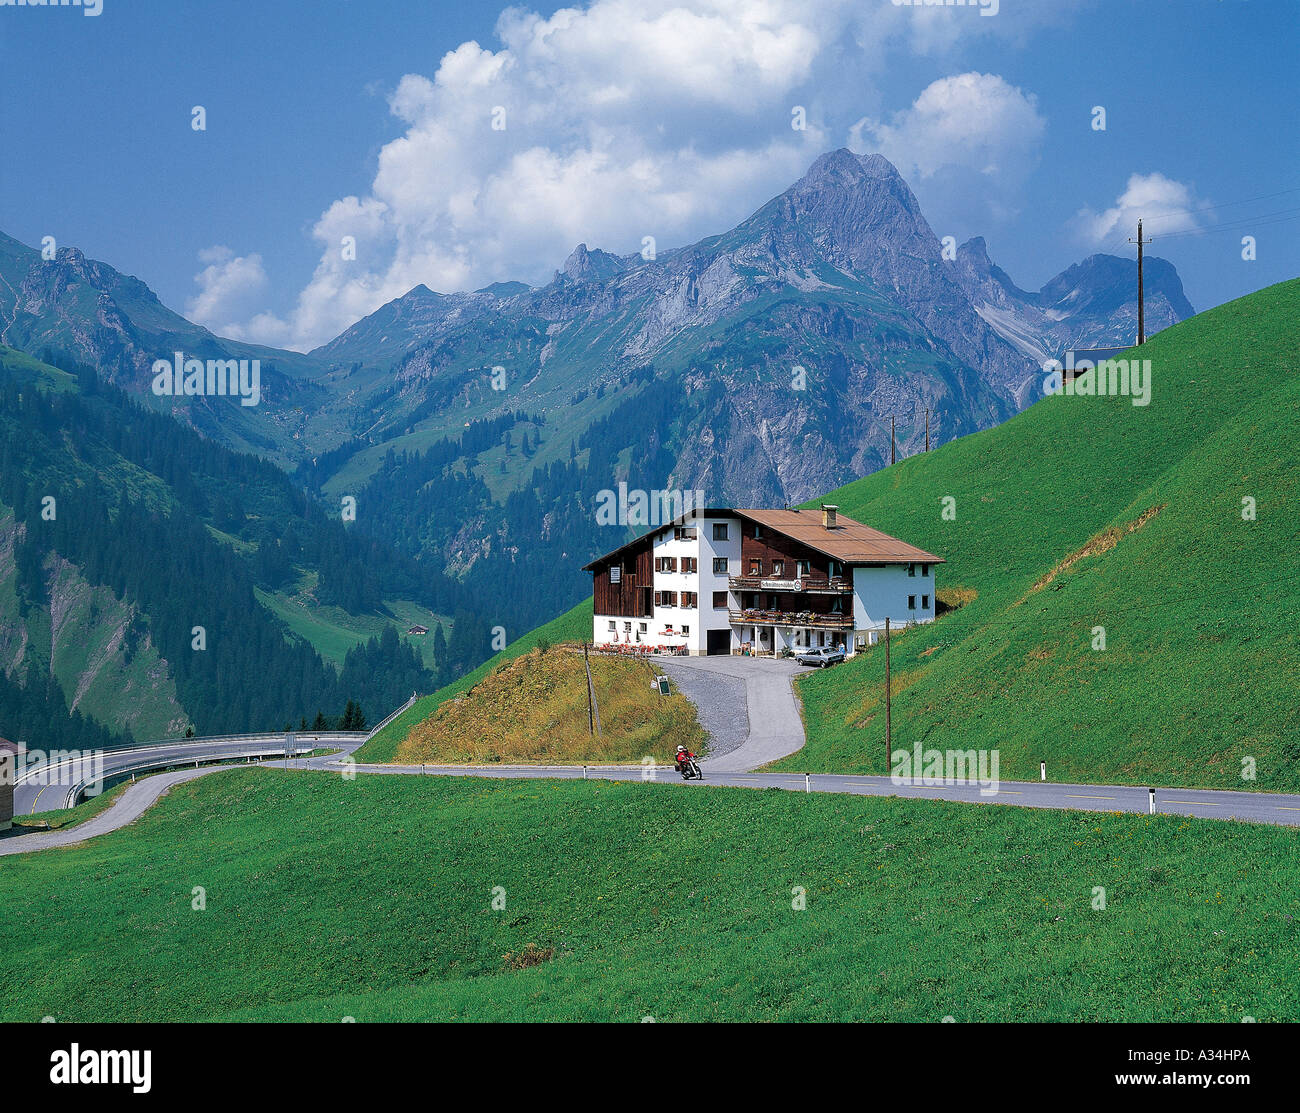 A mountain cabin in by the hills Stock Photo